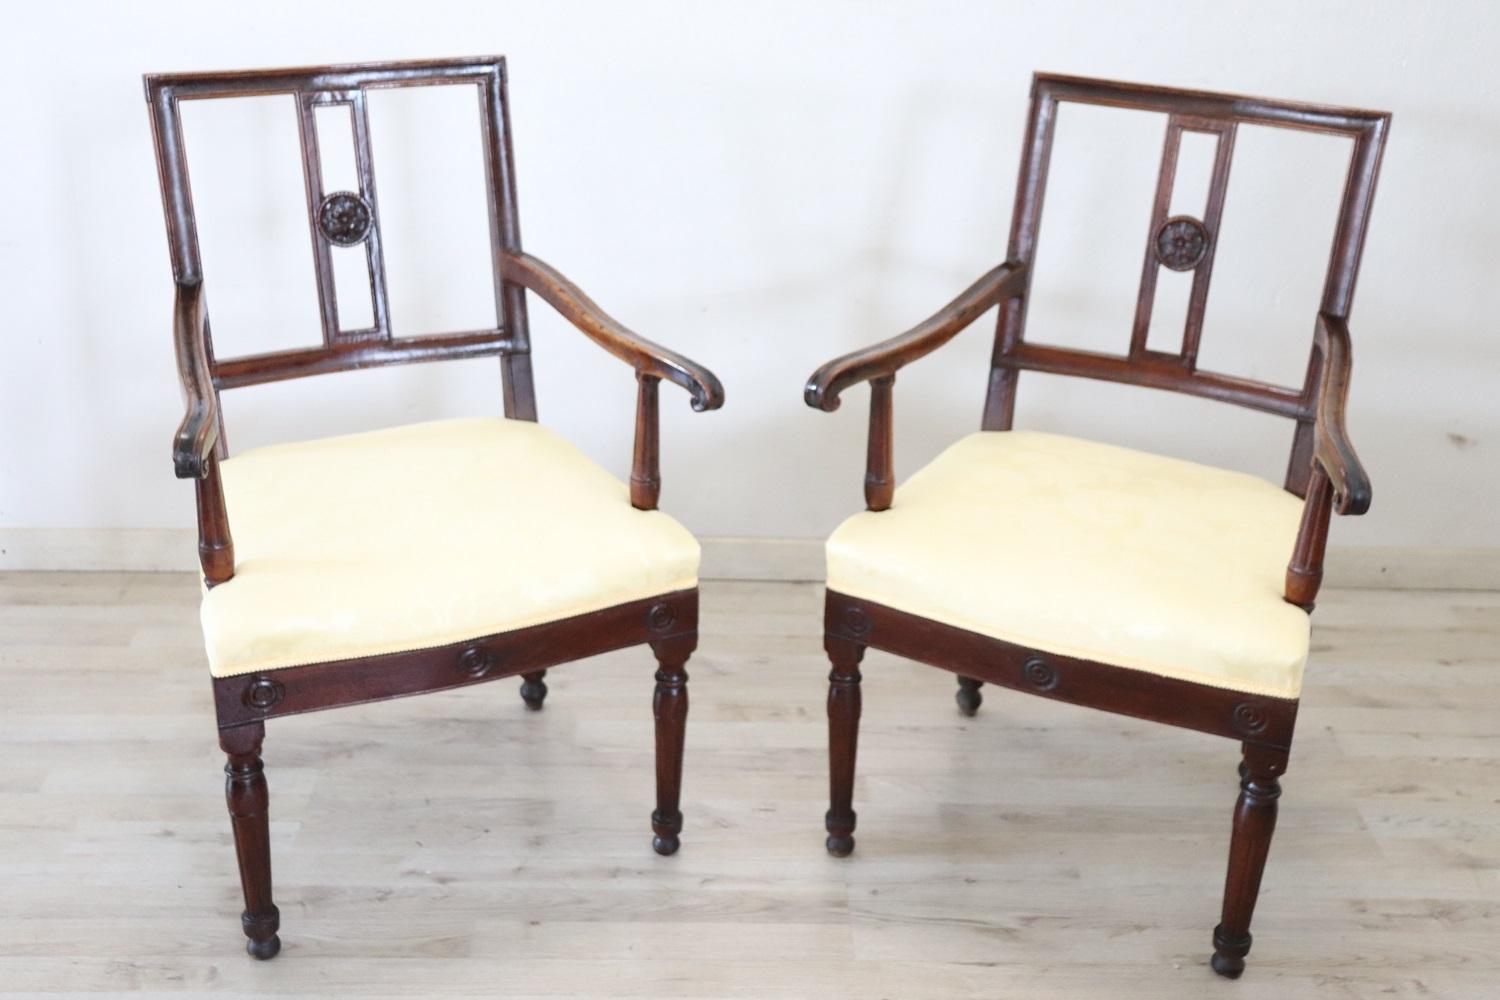 Lovely Italian antique armchairs, set of 2, 1750. These armchairs are of the period Louis XVI in solid walnut wood. The seat upholstered in fabric. Beautiful simple line. This beautiful armchairs has an enveloping shape and a comfortable seat. Good